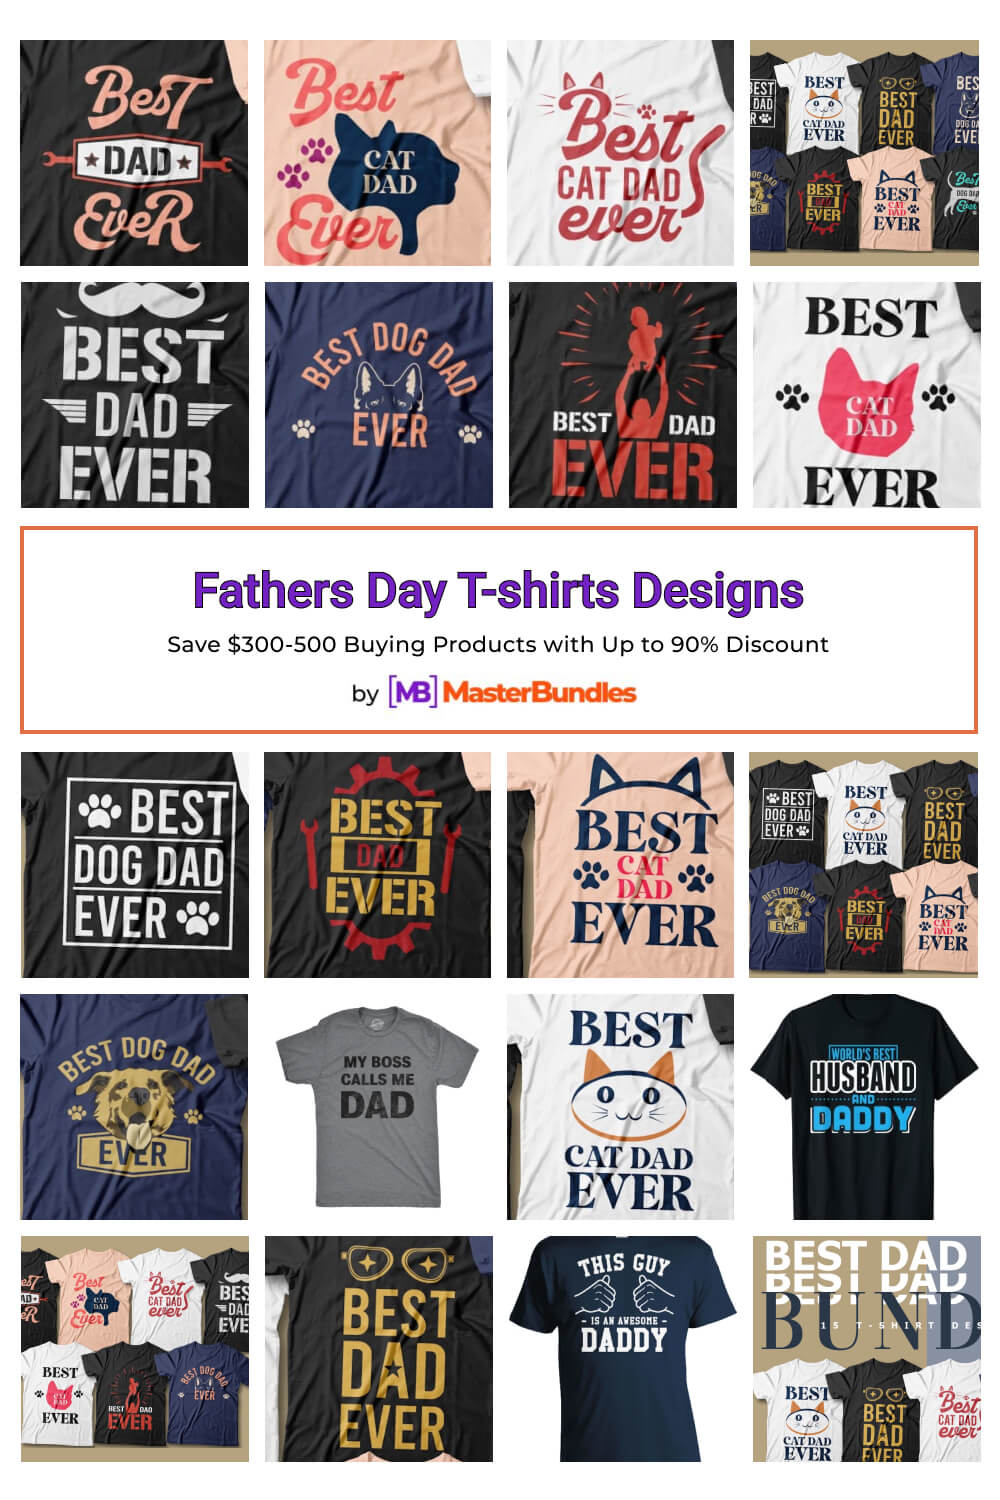 fathers day t shirts designs pinterest image.